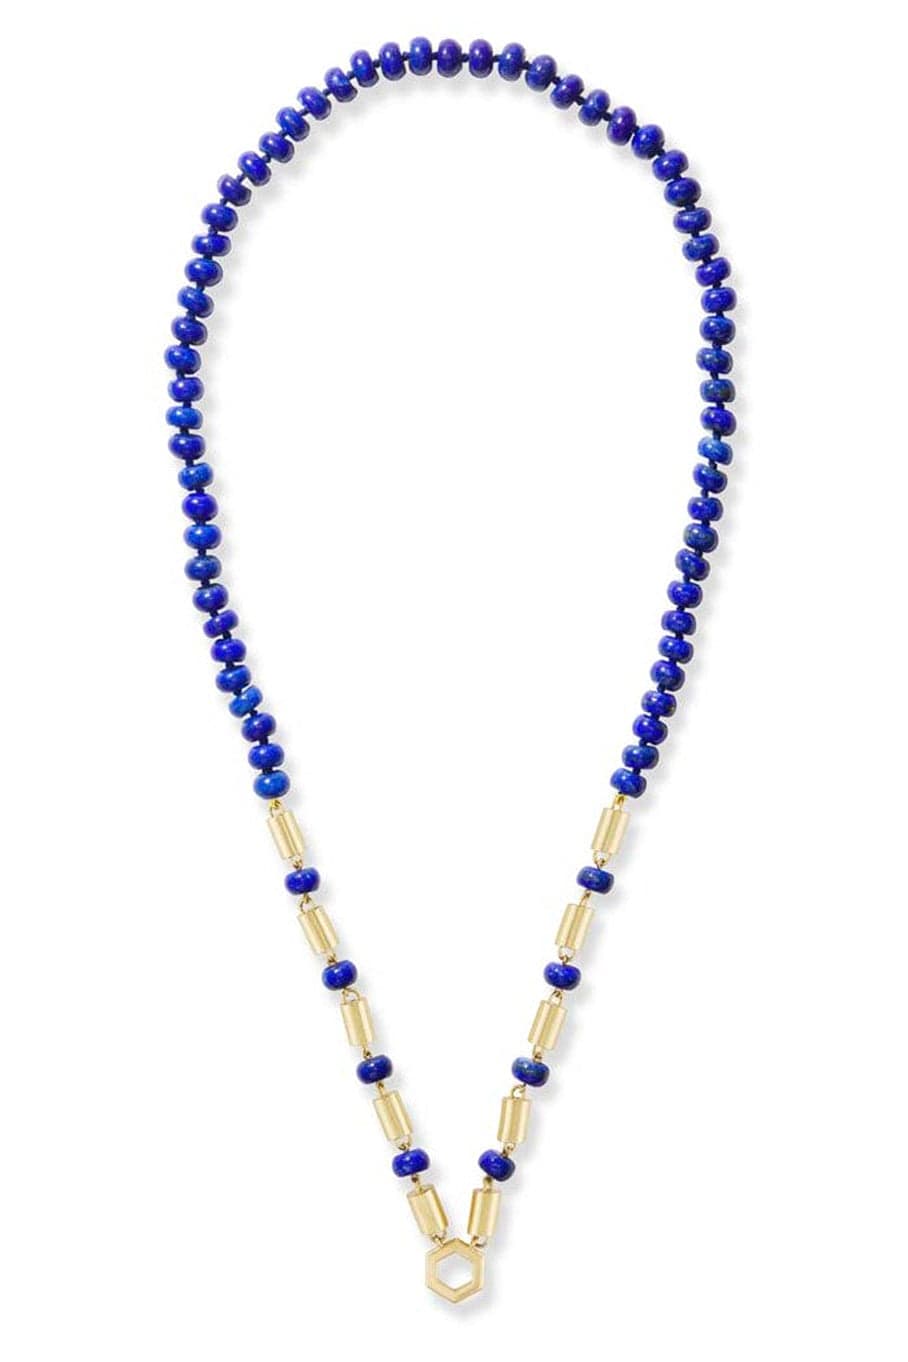 HARWELL GODFREY-Lapis Baht and Bead Necklace-YELLOW GOLD